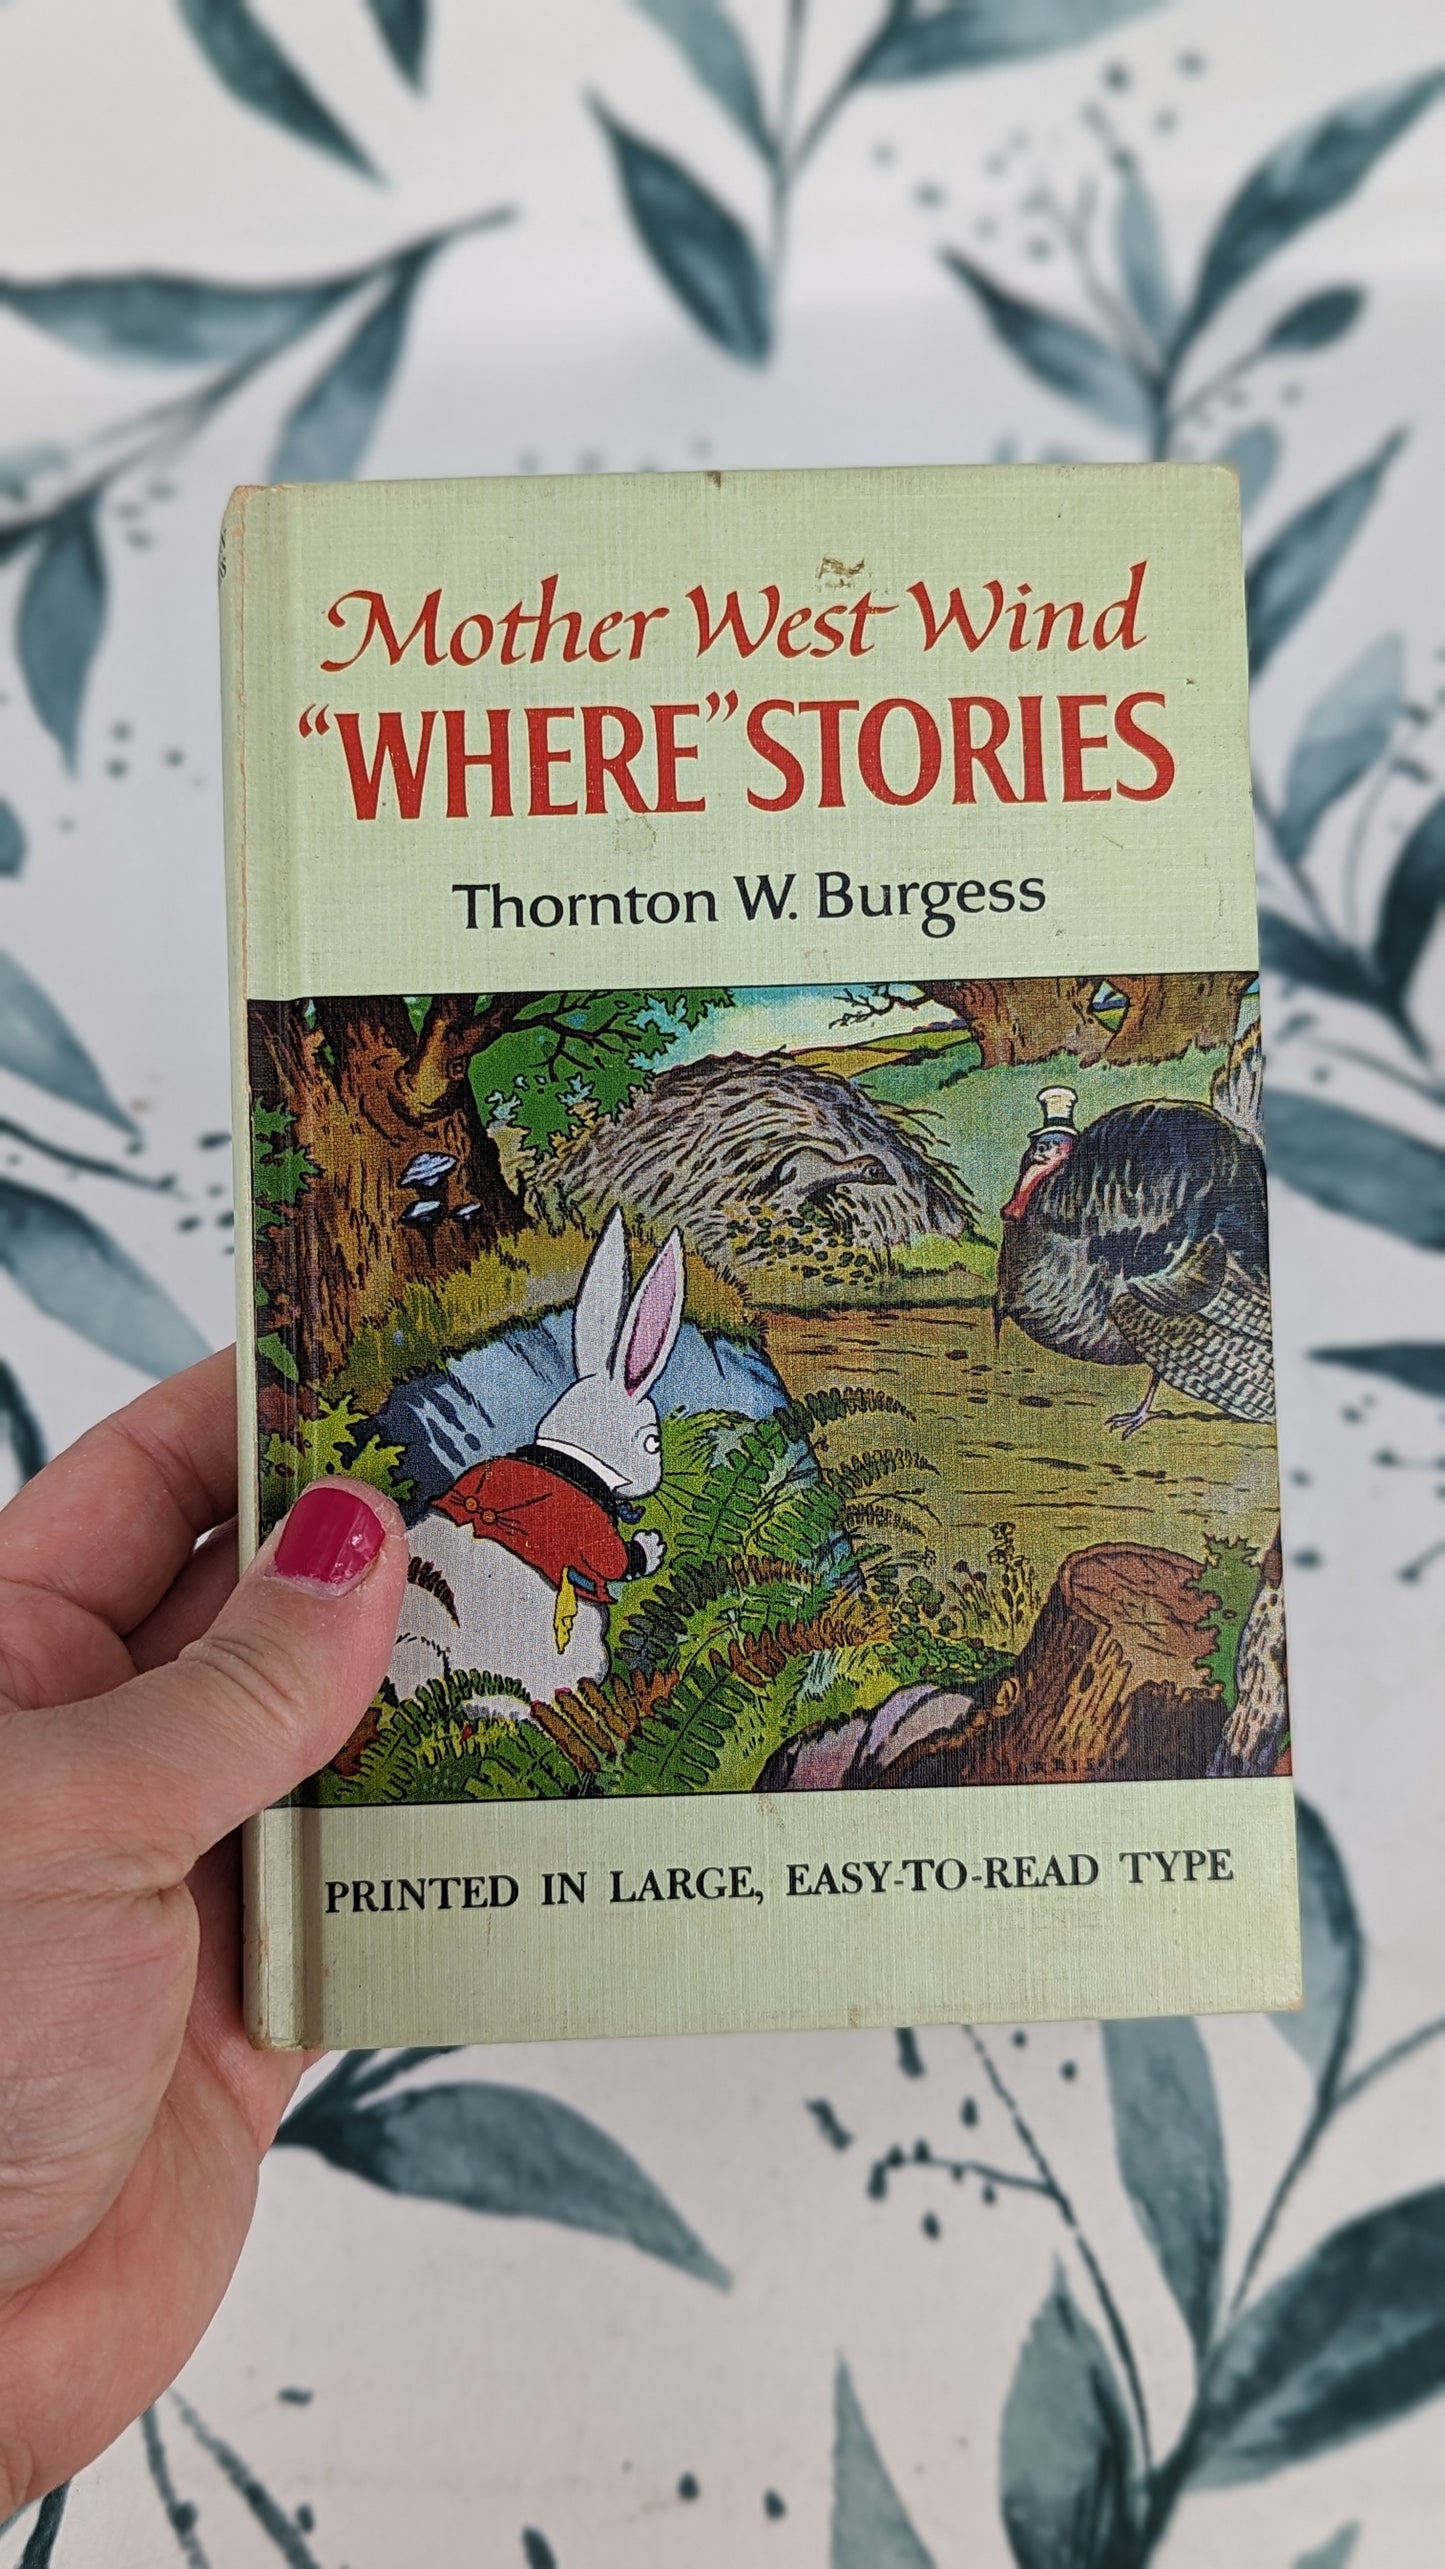 Mother West Wind "WHERE" Stories